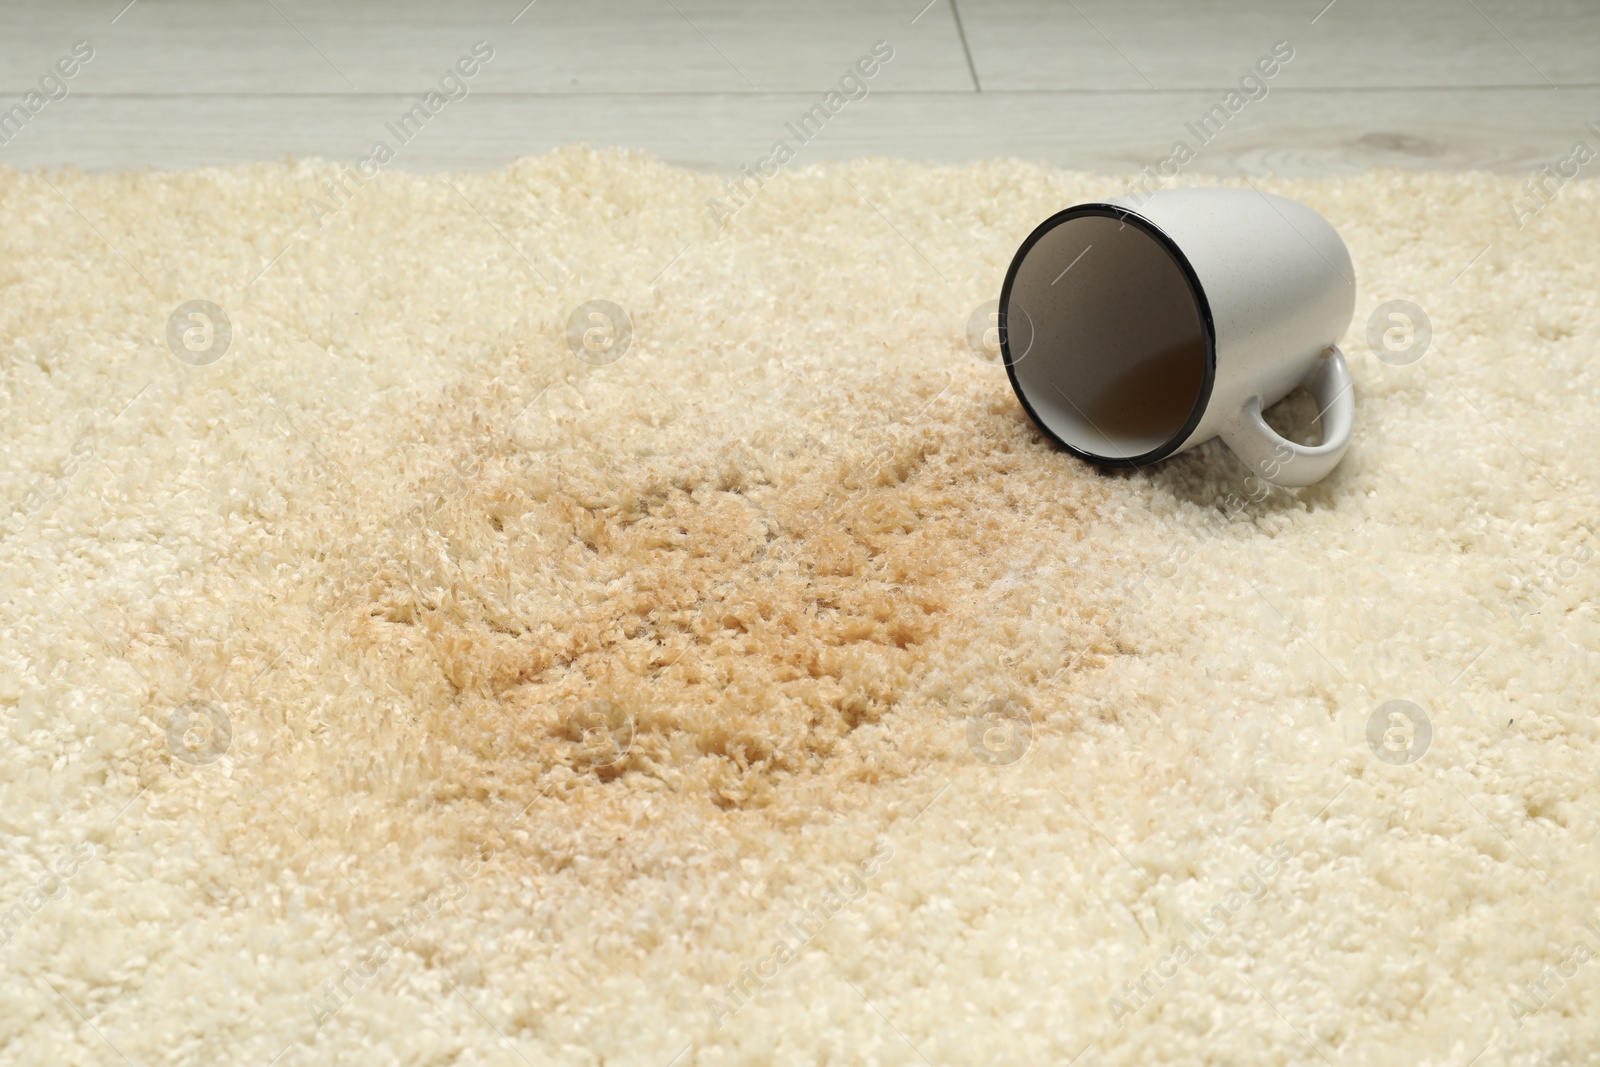 Photo of Overturned cup and spilled drink on beige carpet, closeup